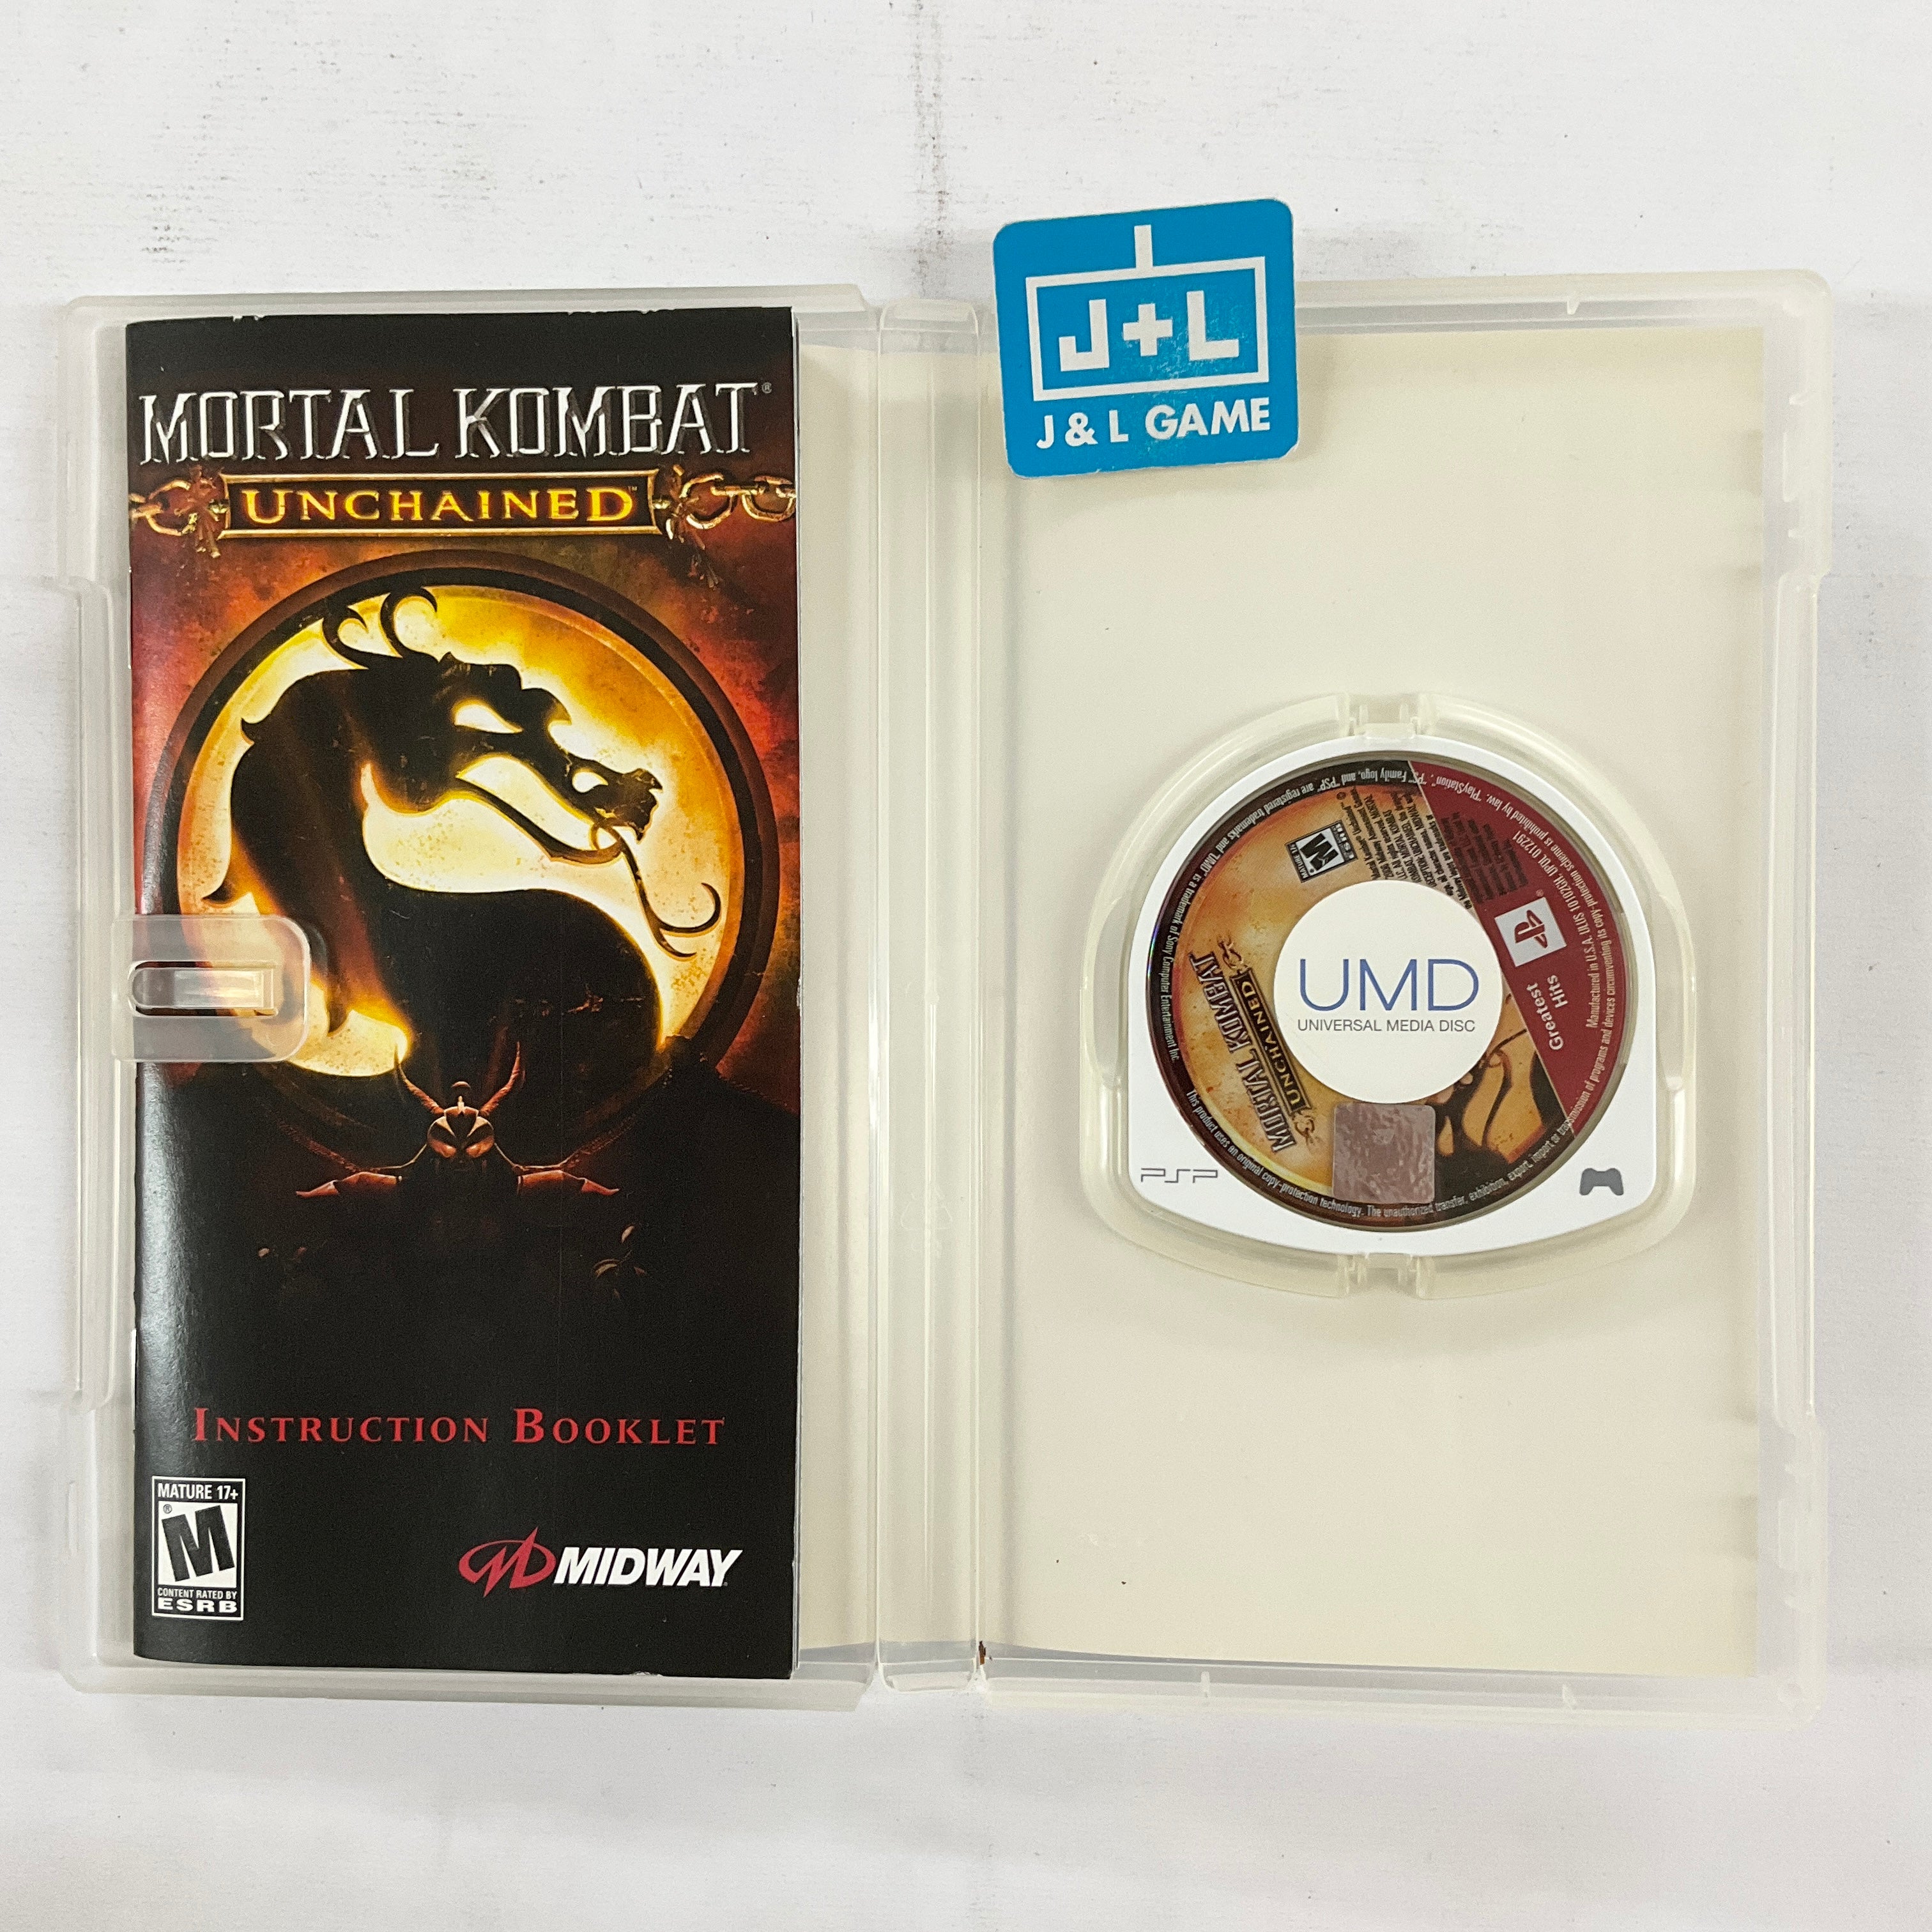 Mortal Kombat: Unchained (Greatest Hits) - SONY PSP [Pre-Owned] Video Games Midway   